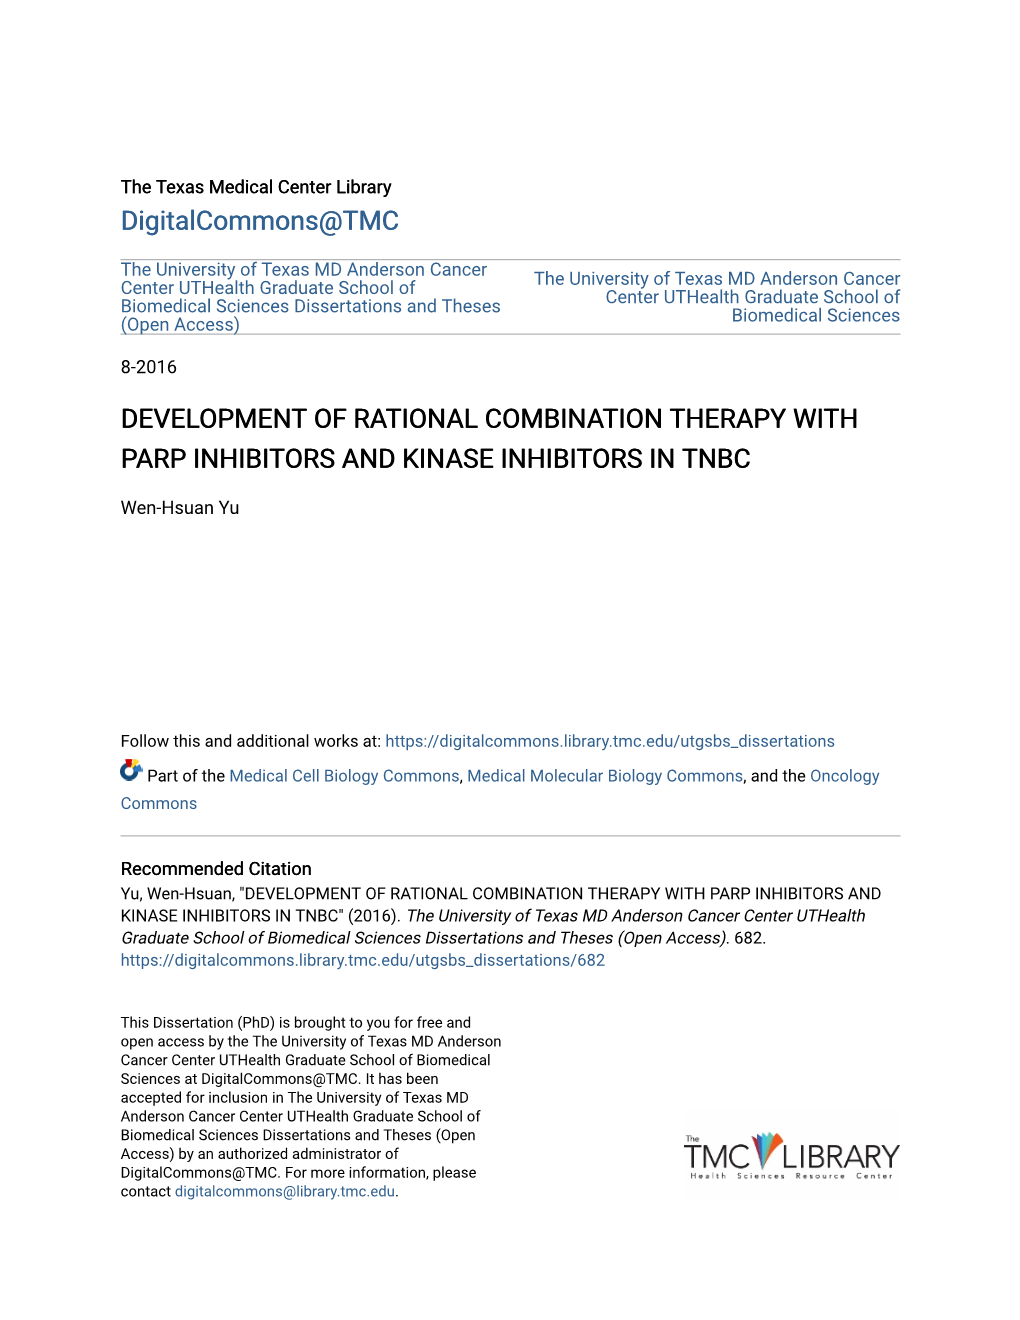 Development of Rational Combination Therapy with Parp Inhibitors and Kinase Inhibitors in Tnbc